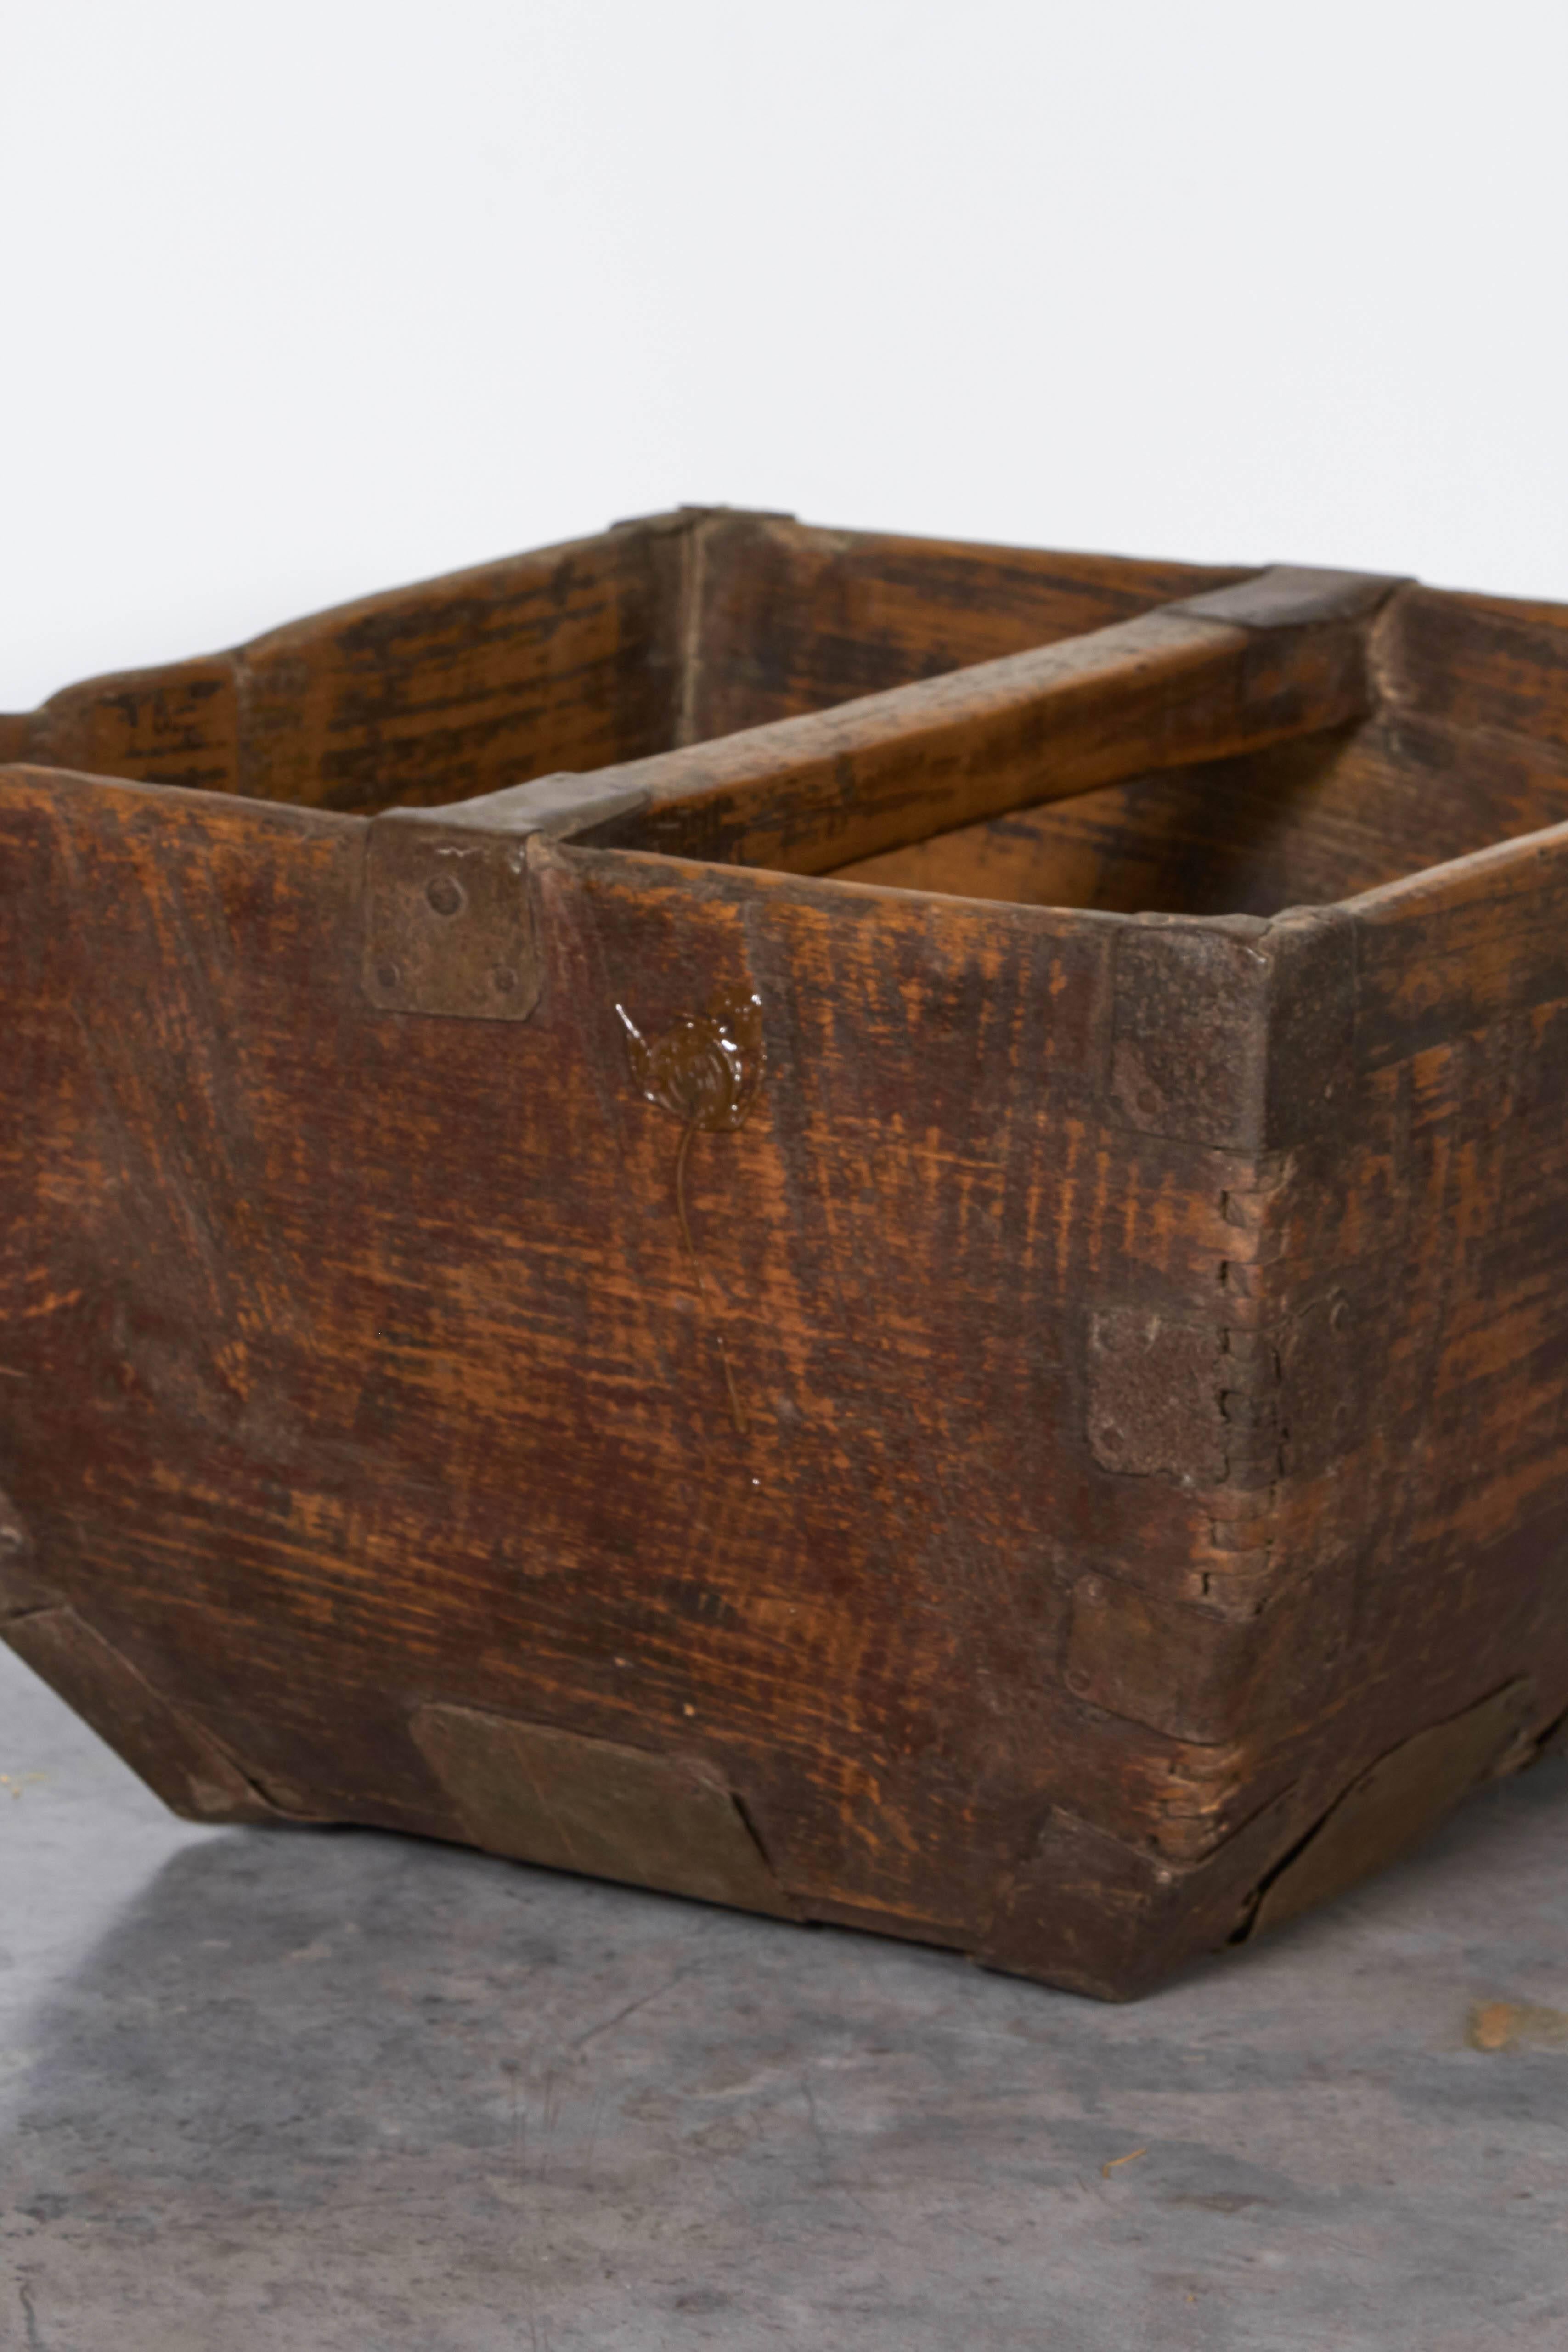 Early 20th Century Antique Chinese Rice Measure Basket